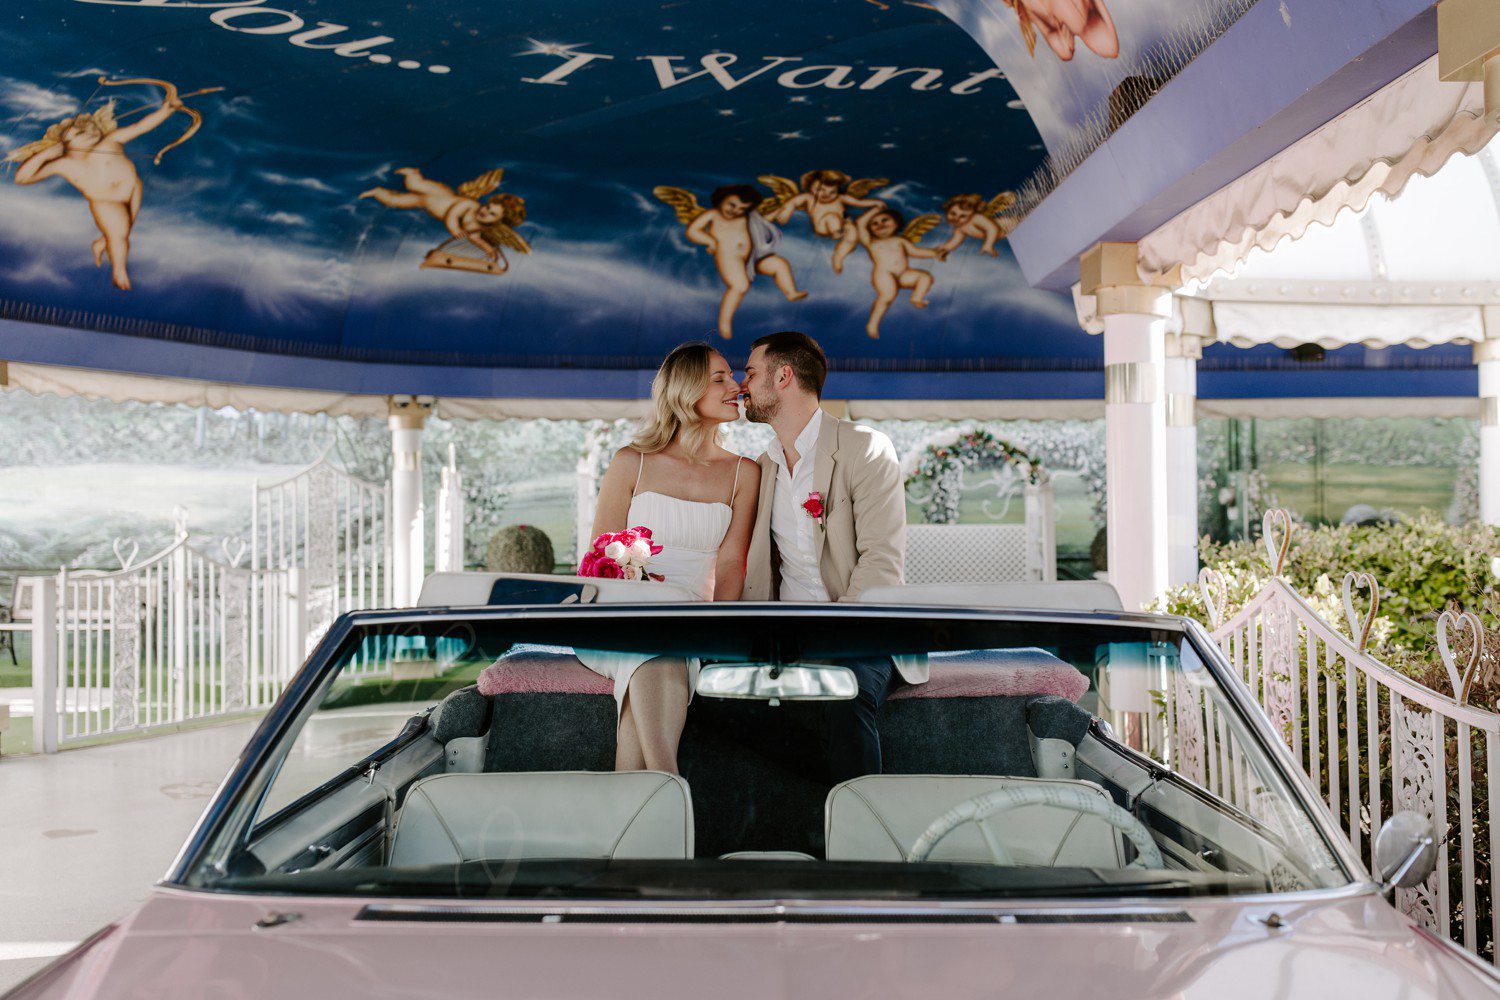 Elopement photos in the pink Cadillac at Little White Chapel.